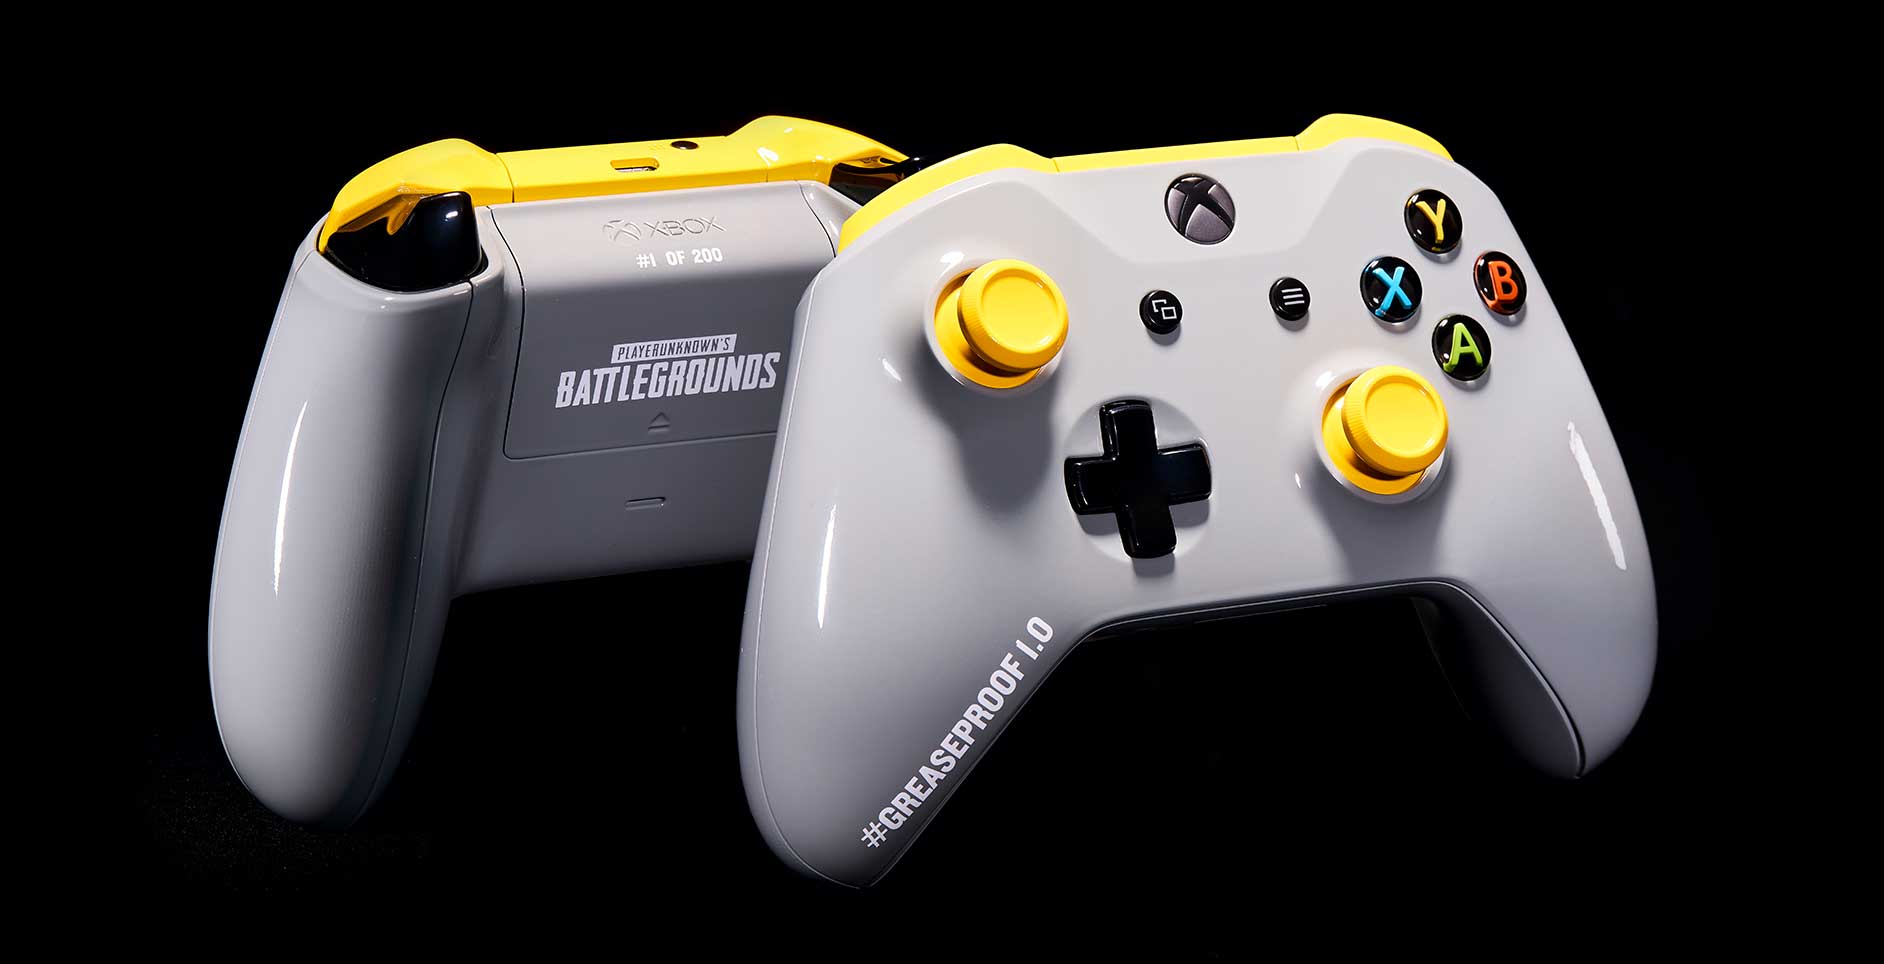 Xbox Australia celebrates PUBG launch with a greaseproof Xbox controller